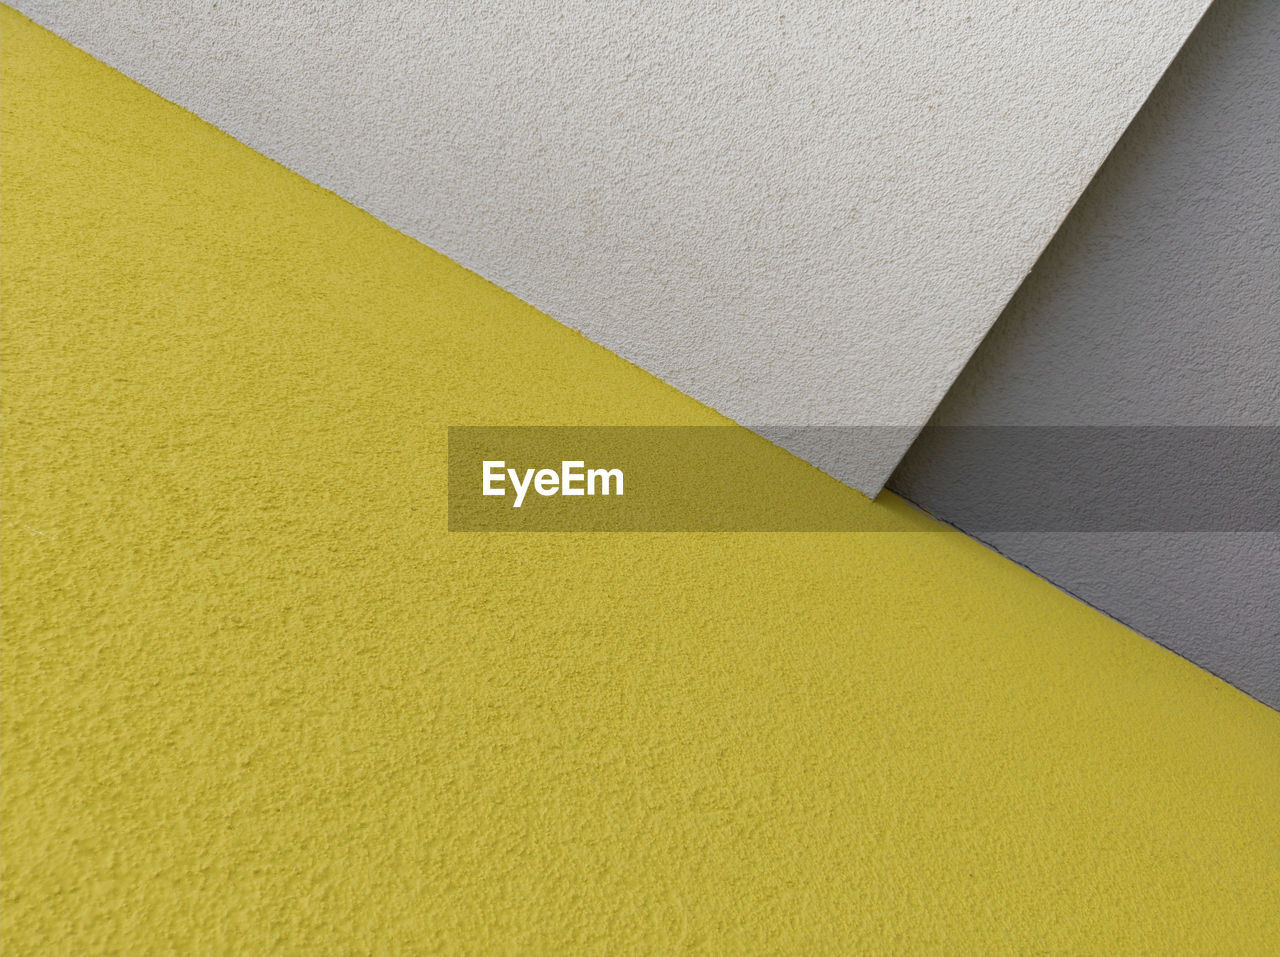 FULL FRAME SHOT OF YELLOW WALL AND PAPER